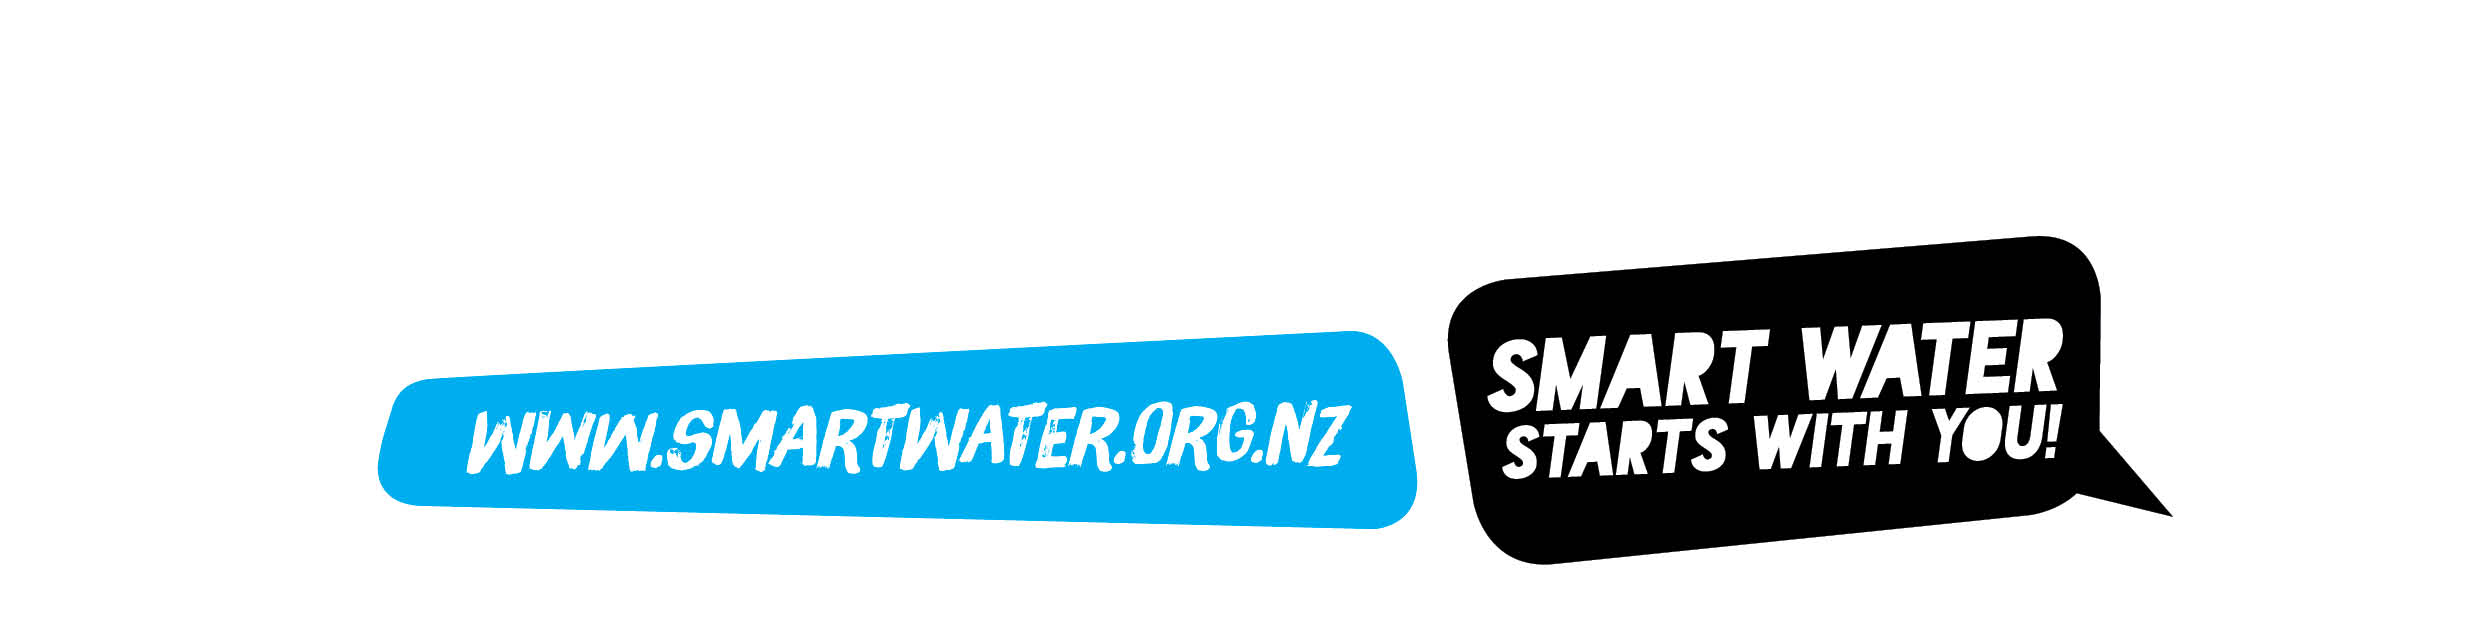 Smart water starts with you - head to smartwater.org.nz for tips on how to reduce your water use